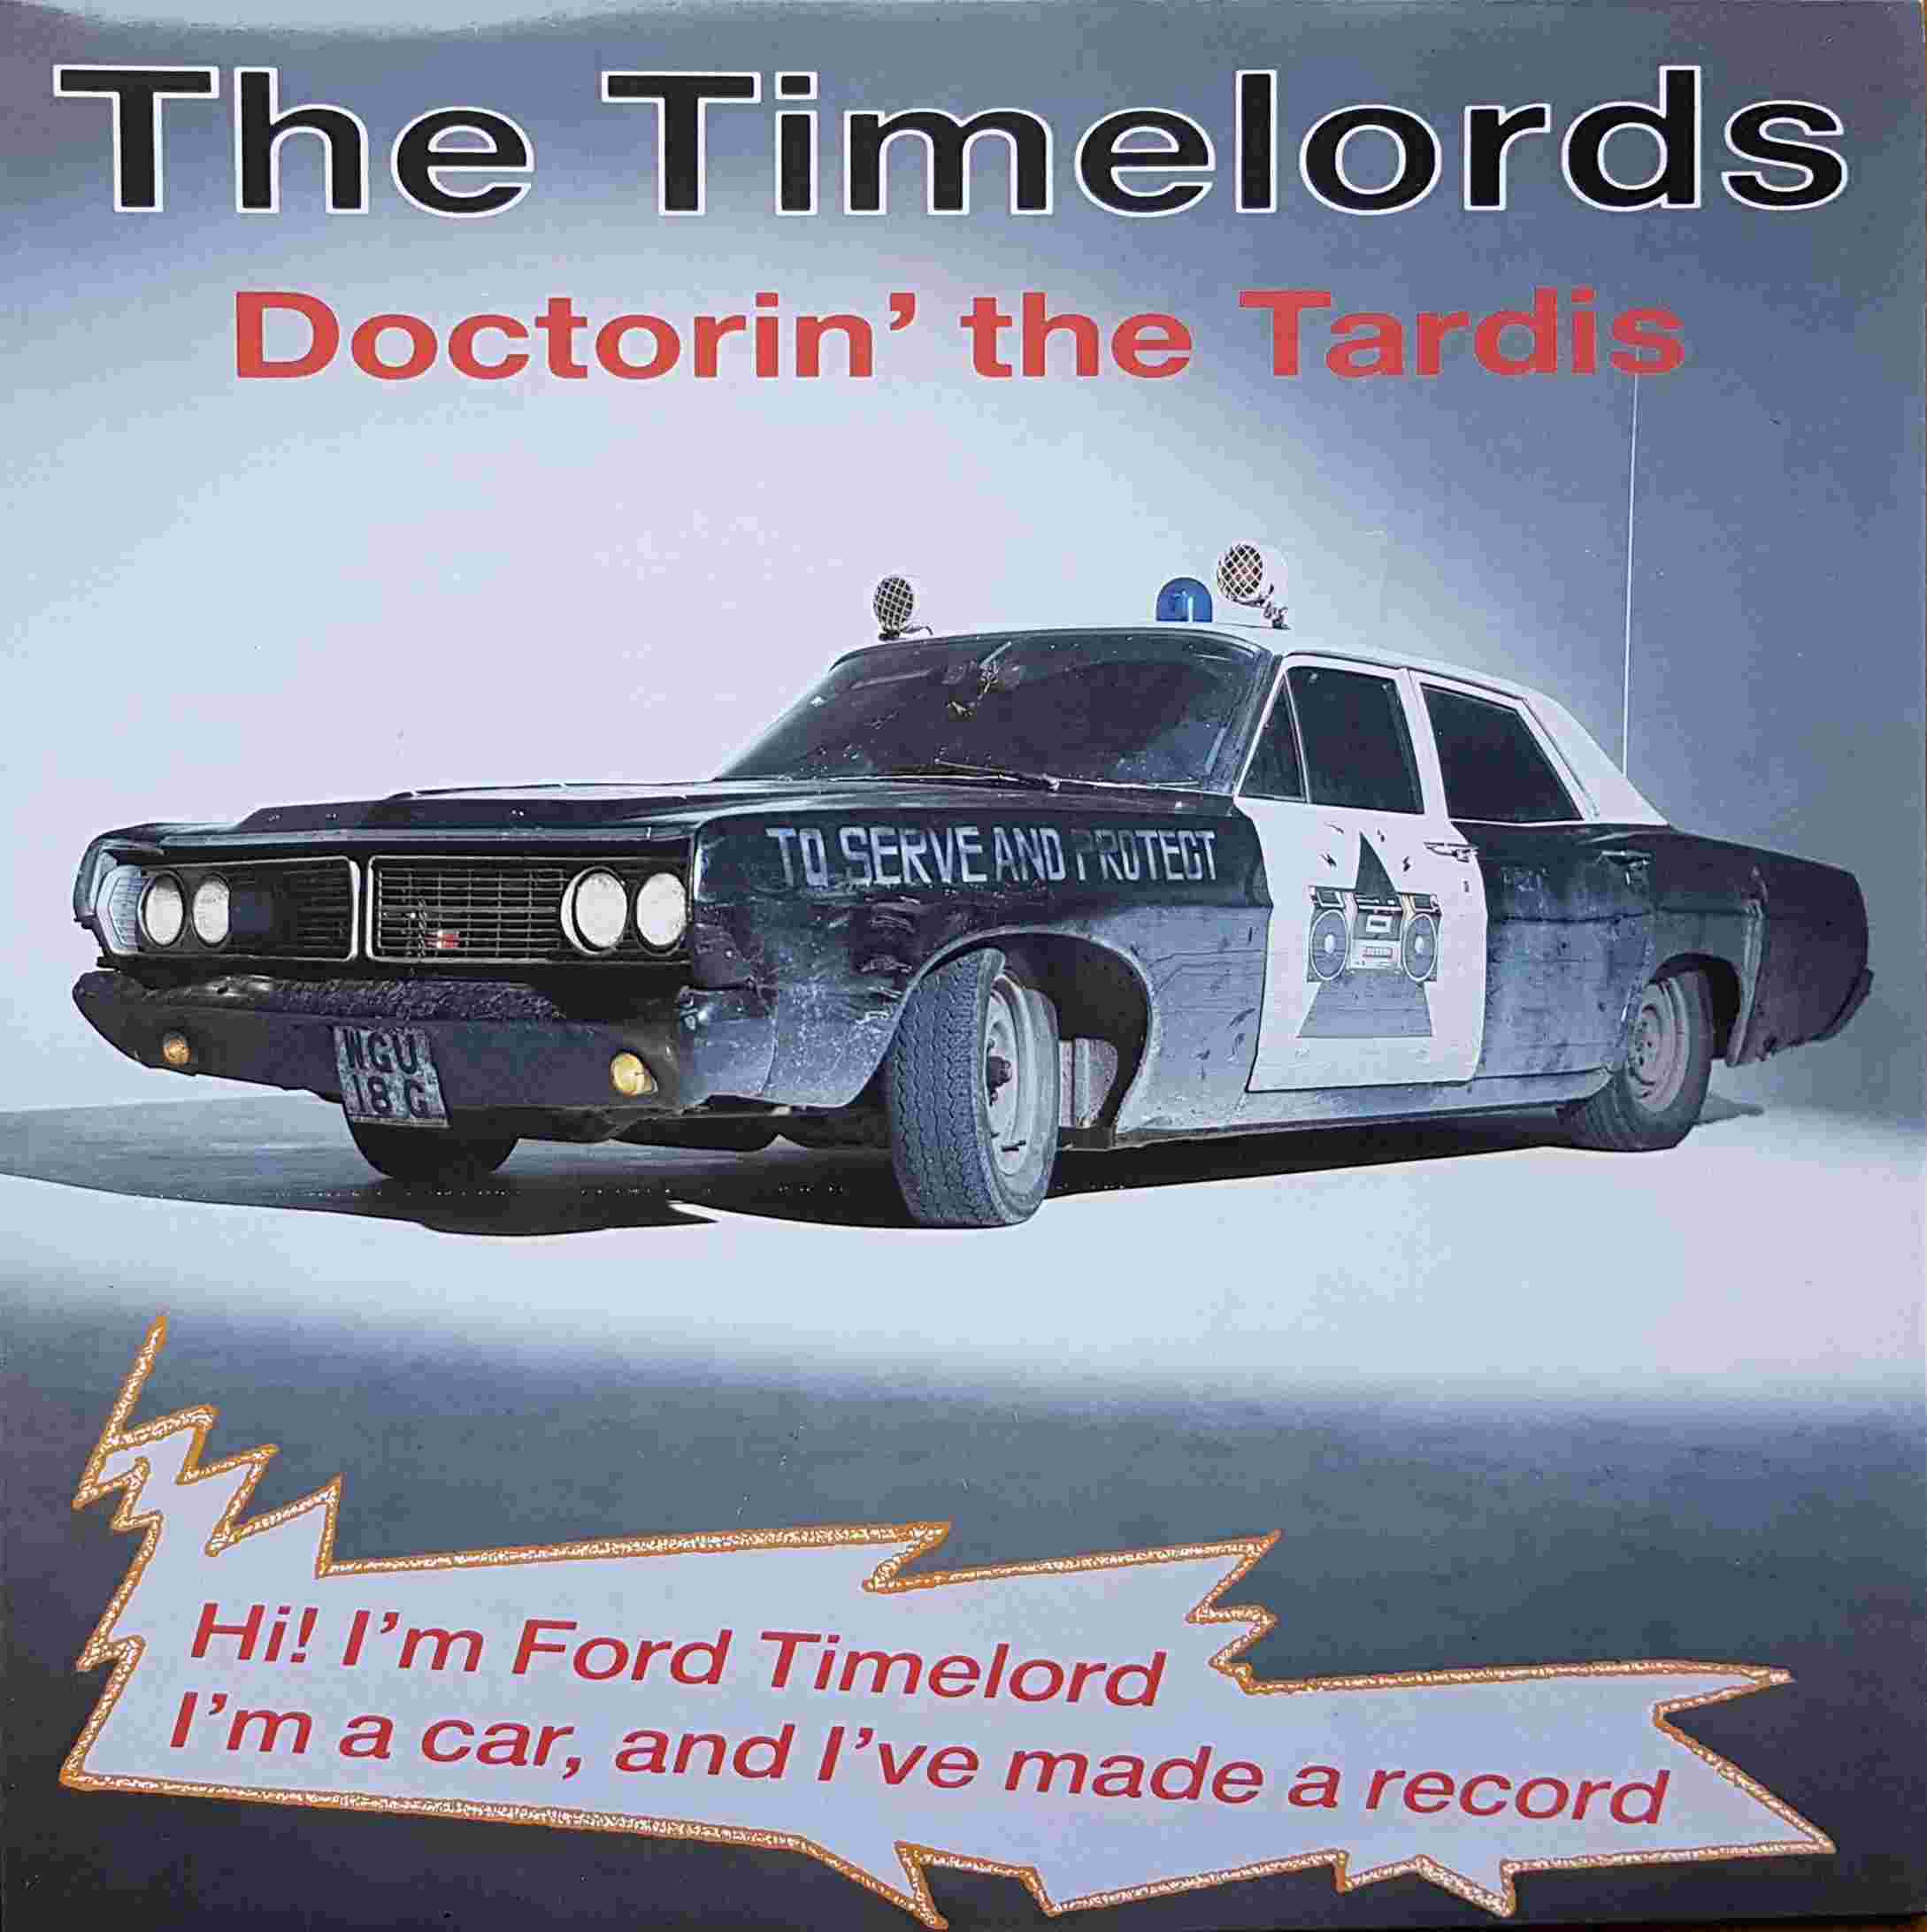 Picture of KLF 003T Doctorin\' the Tardis by artist Ron Grainer / The Timelords from the BBC records and Tapes library